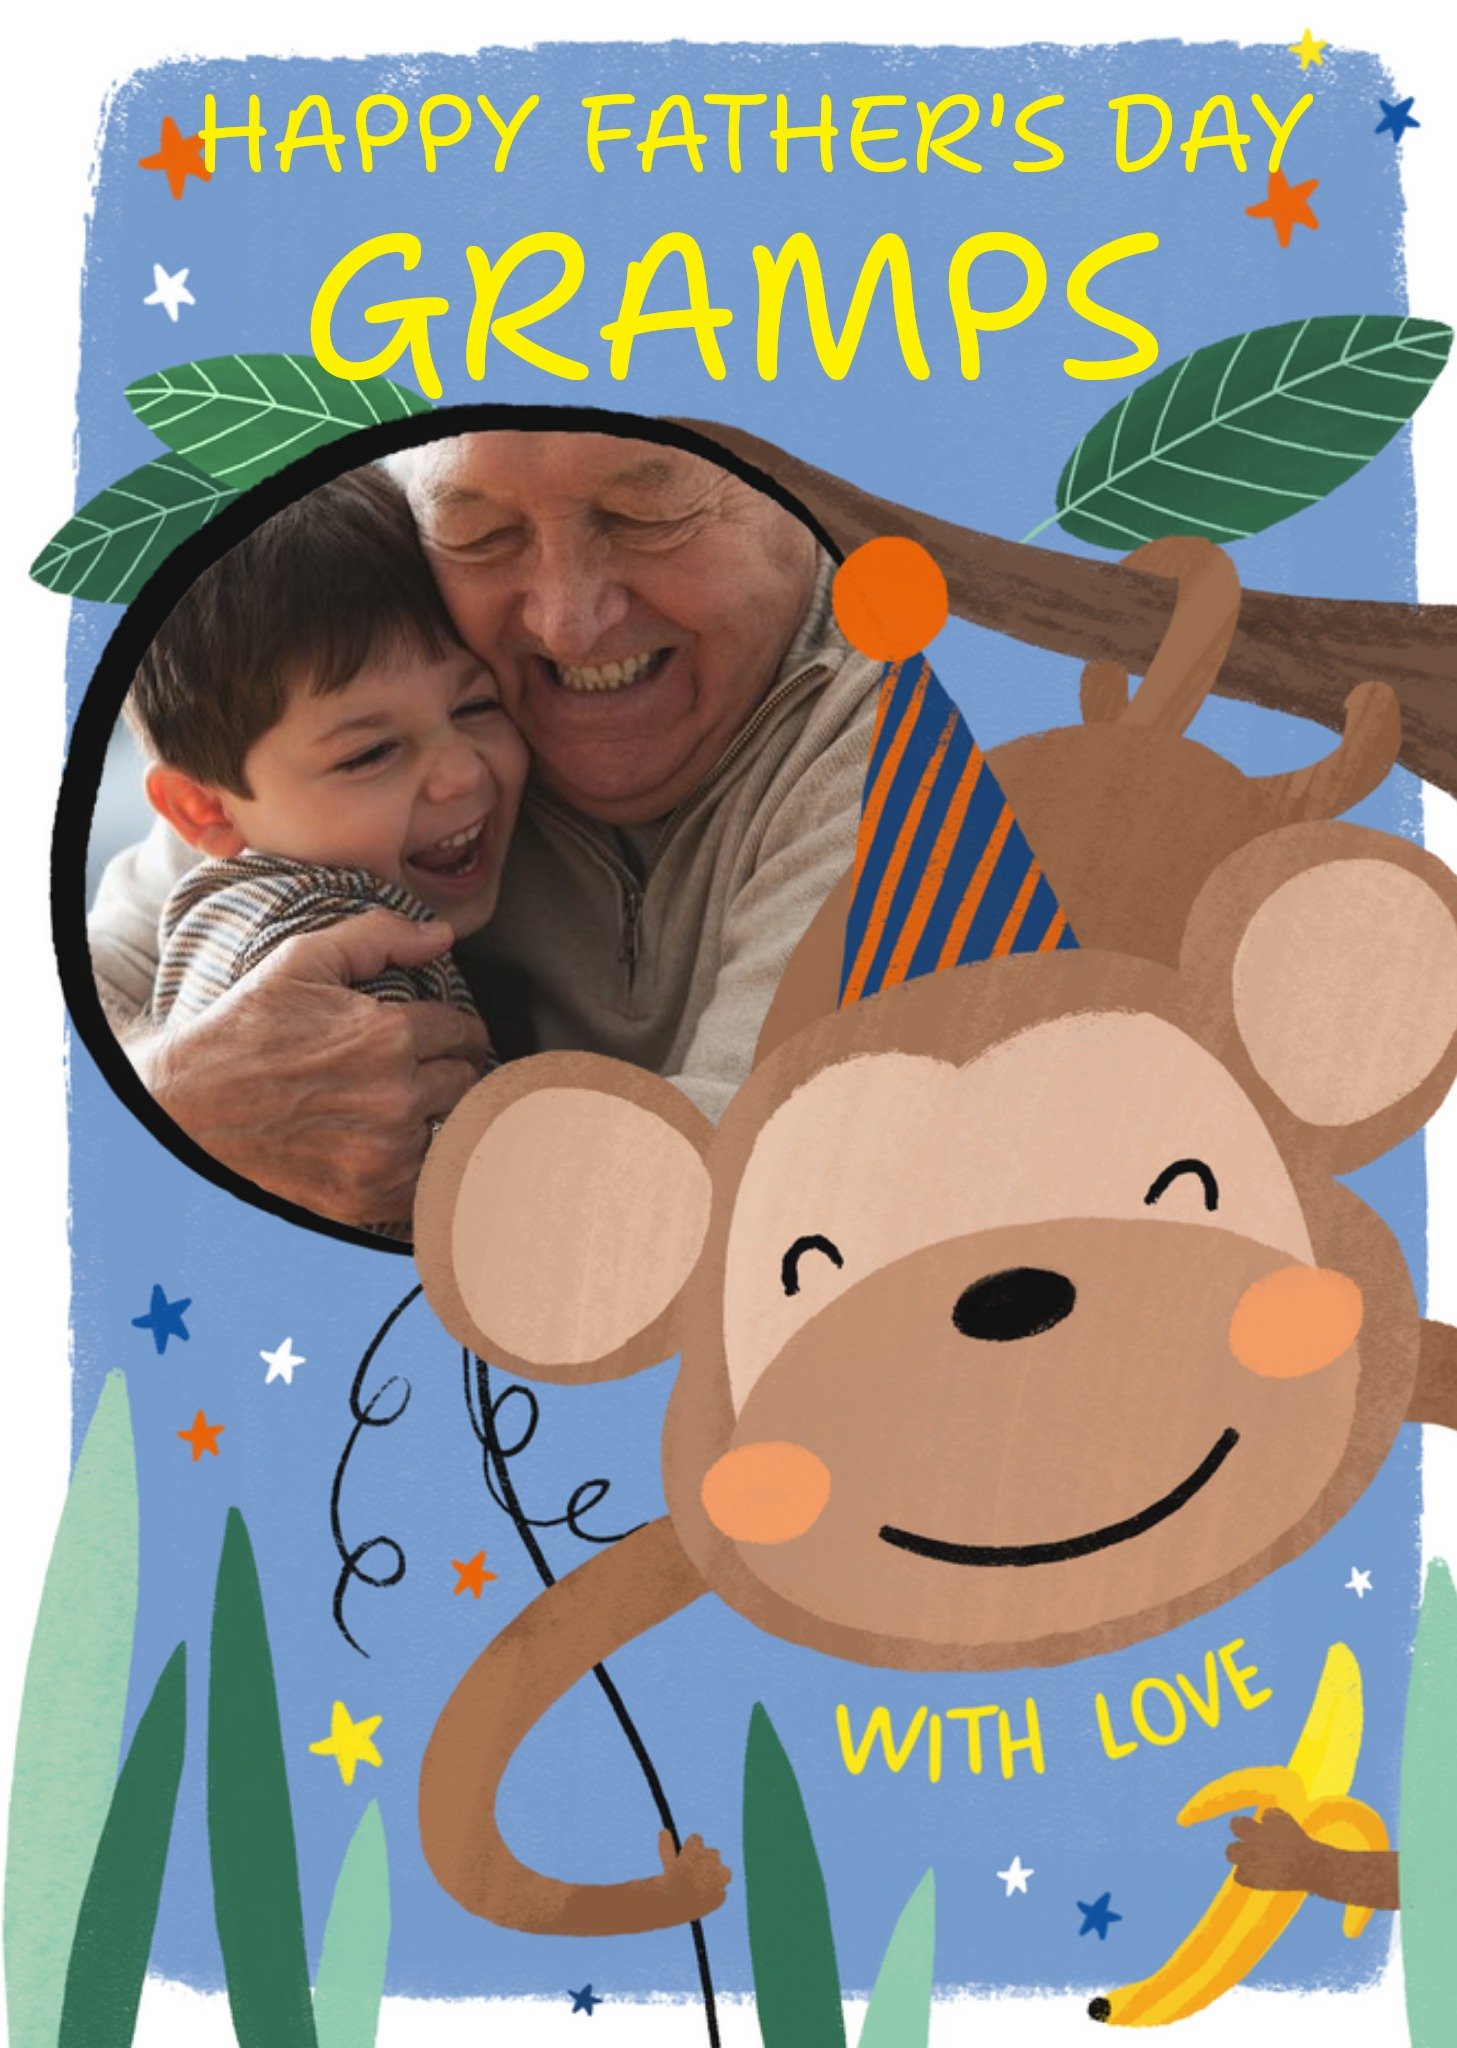 Moonpig Cute Monkey Illustration Photo Upload Gramps Father's Day Card Ecard